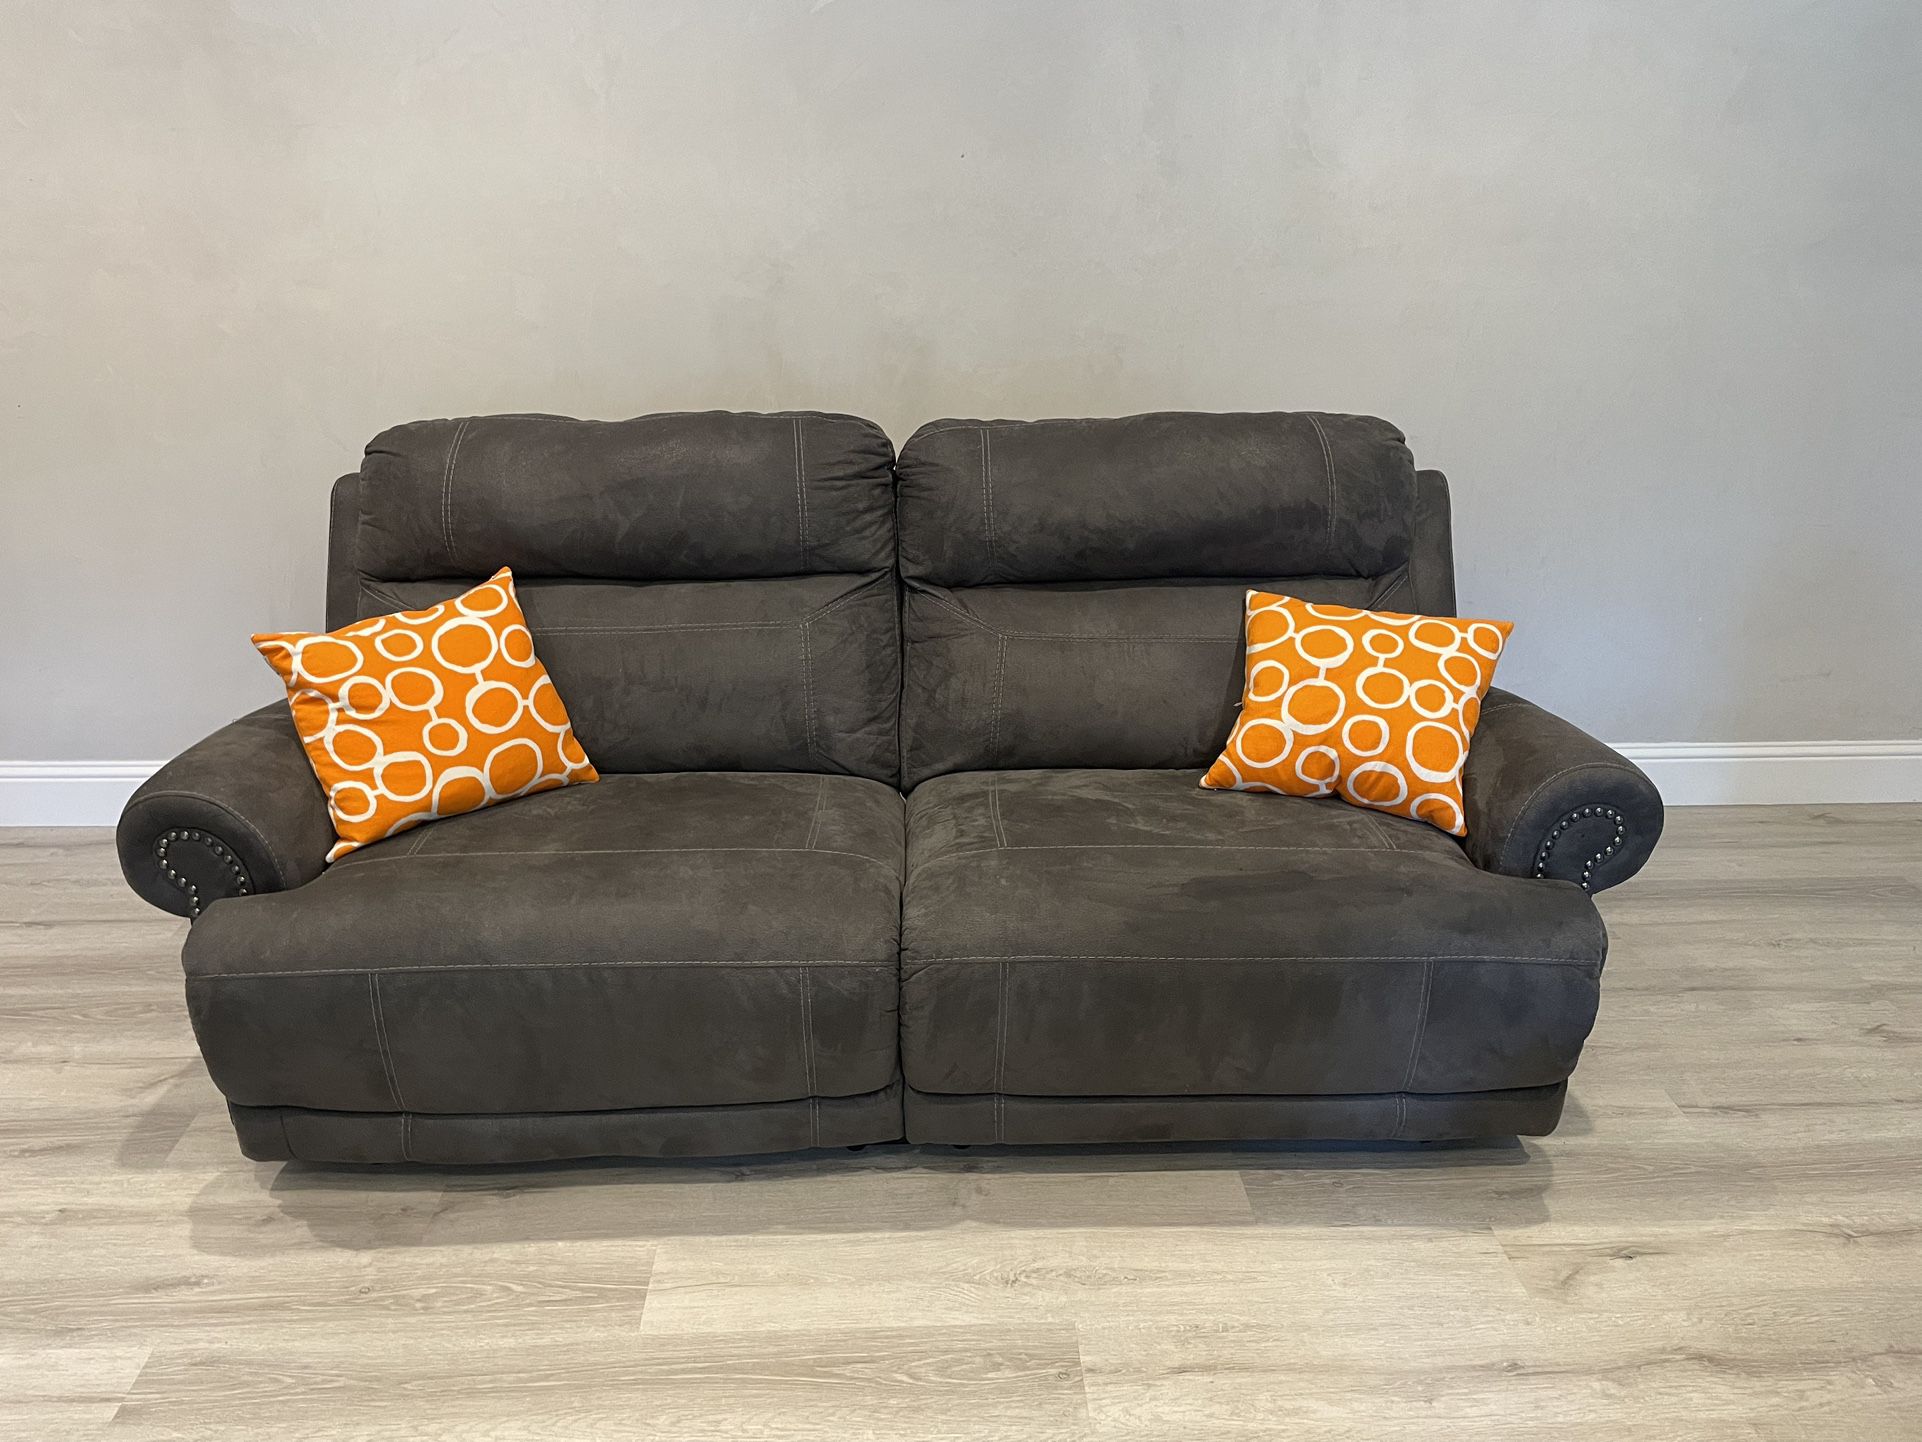 Oversized Love Seat & Oversized Arm Chair Set with Push Button Automatic Recline